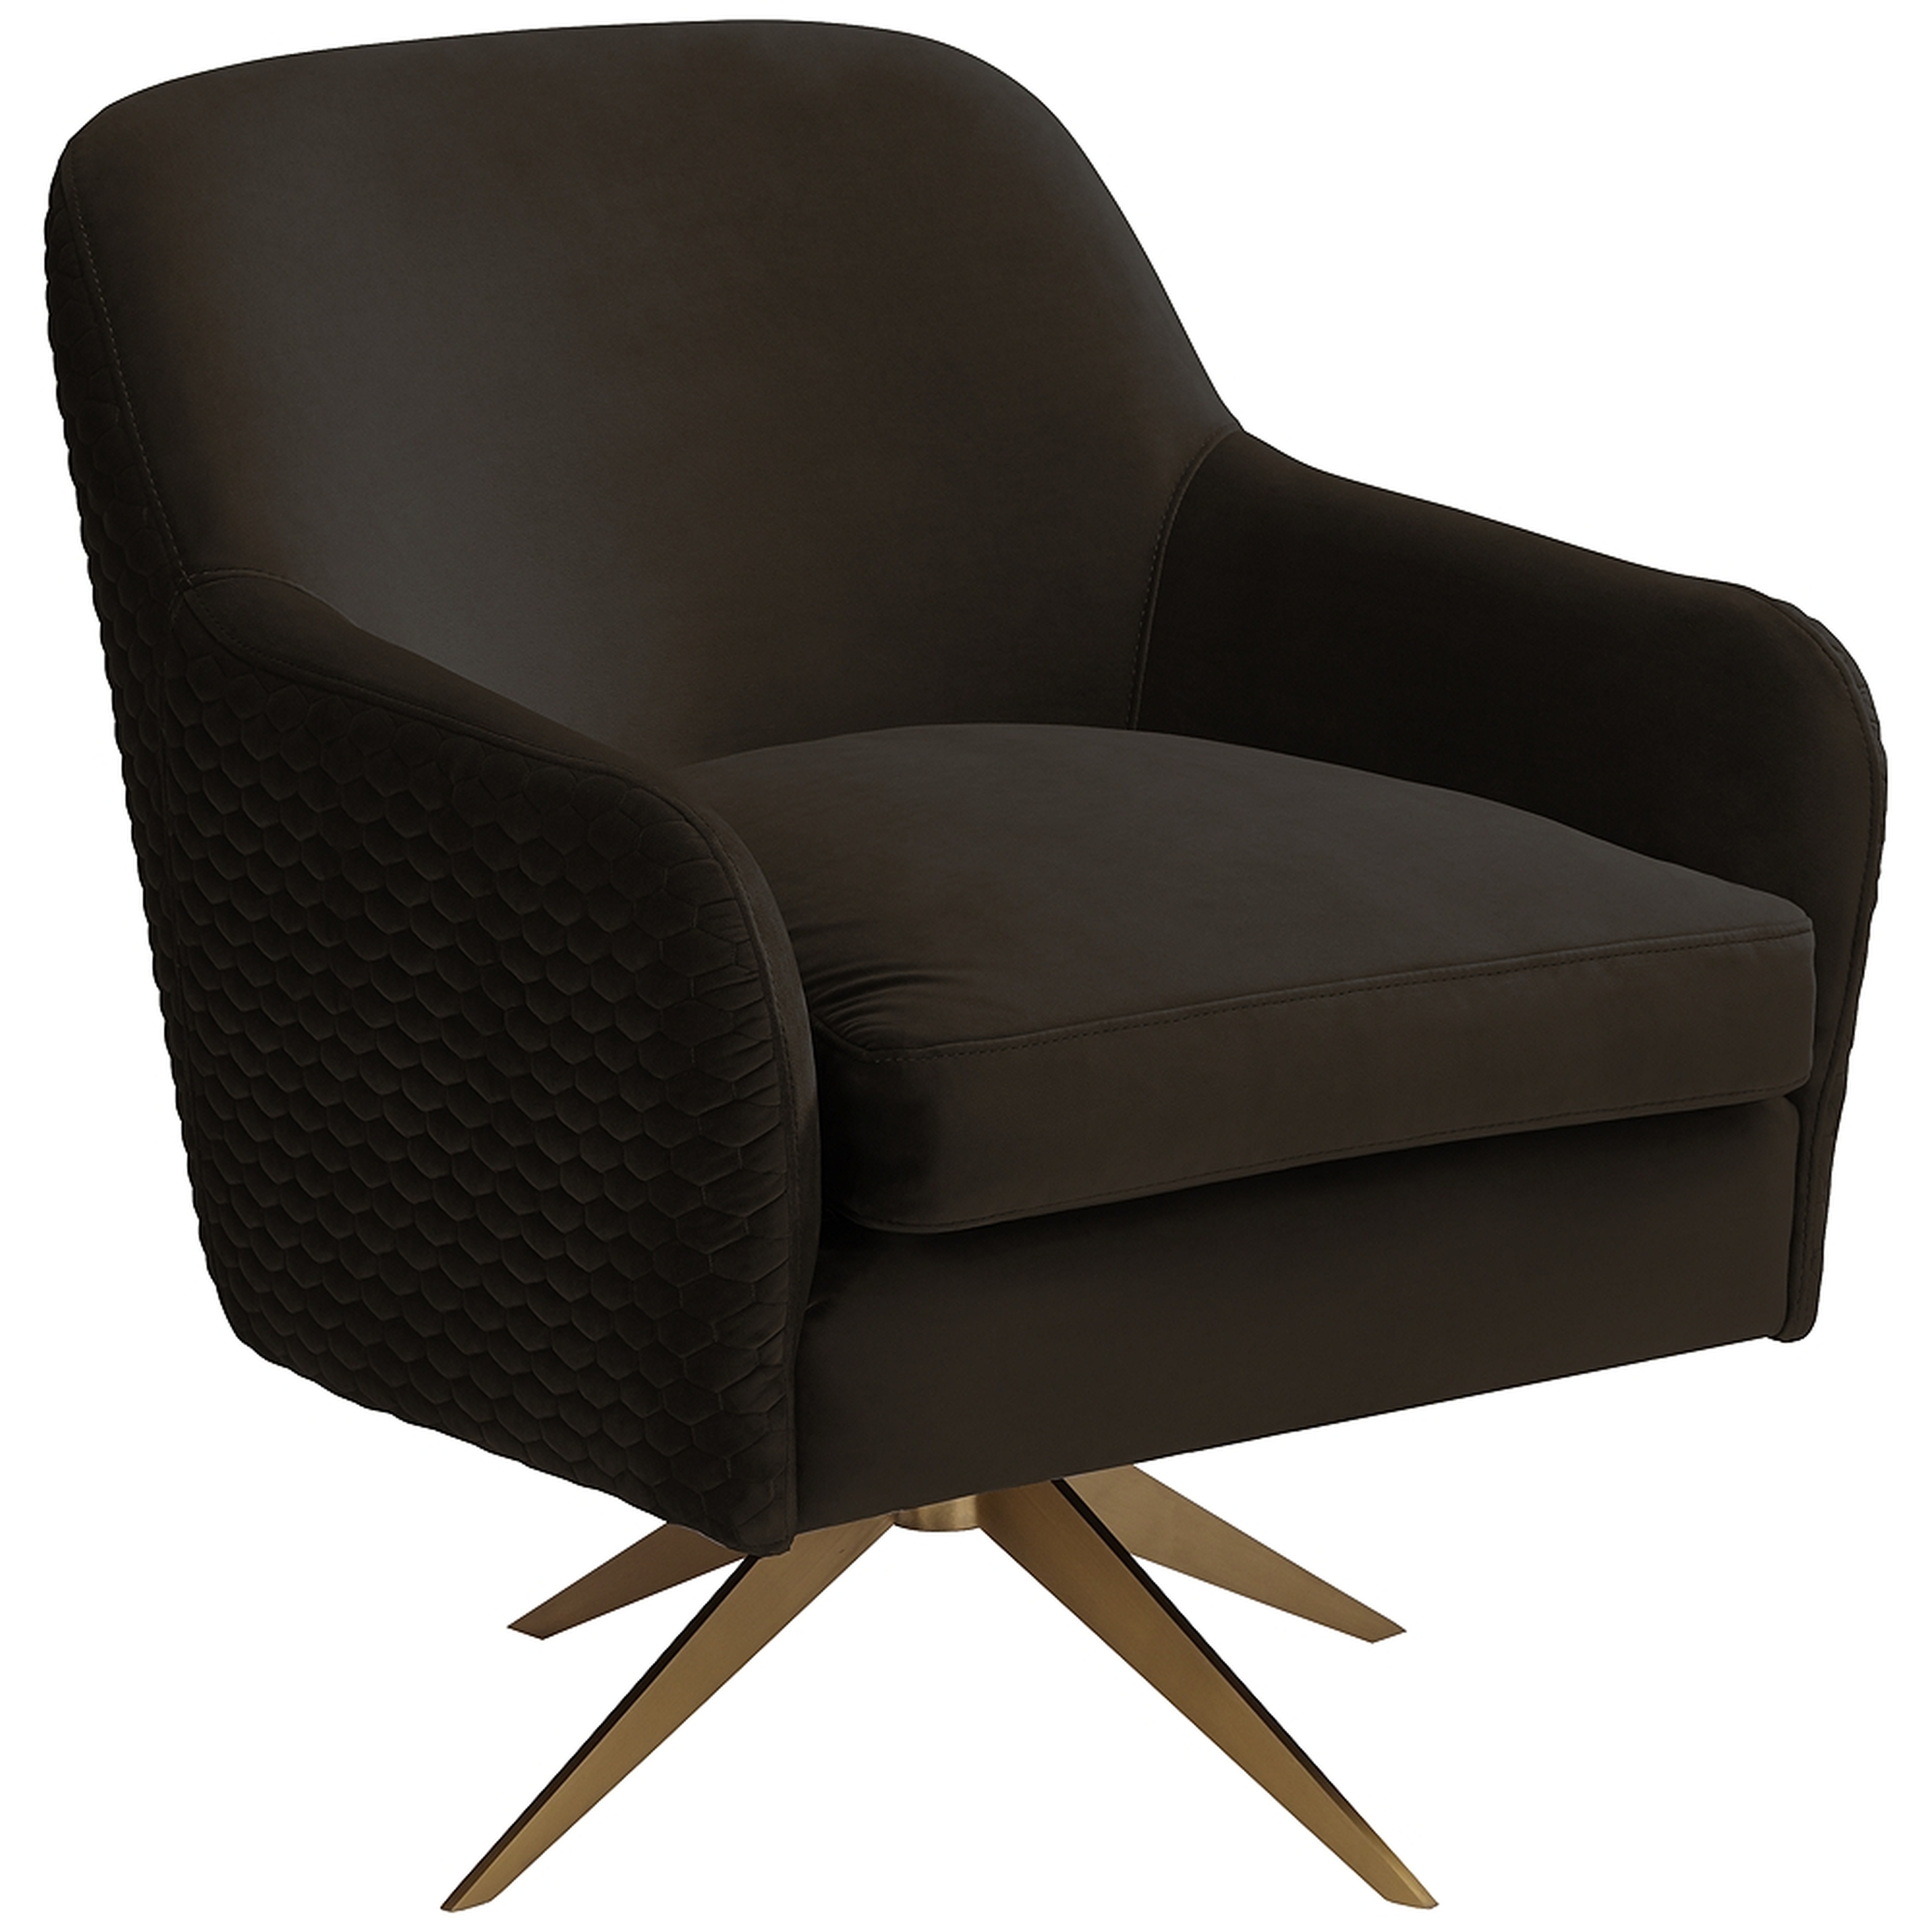 Ames Quilted Espresso Velvet Swivel Chair - Style # 79J44 - Lamps Plus